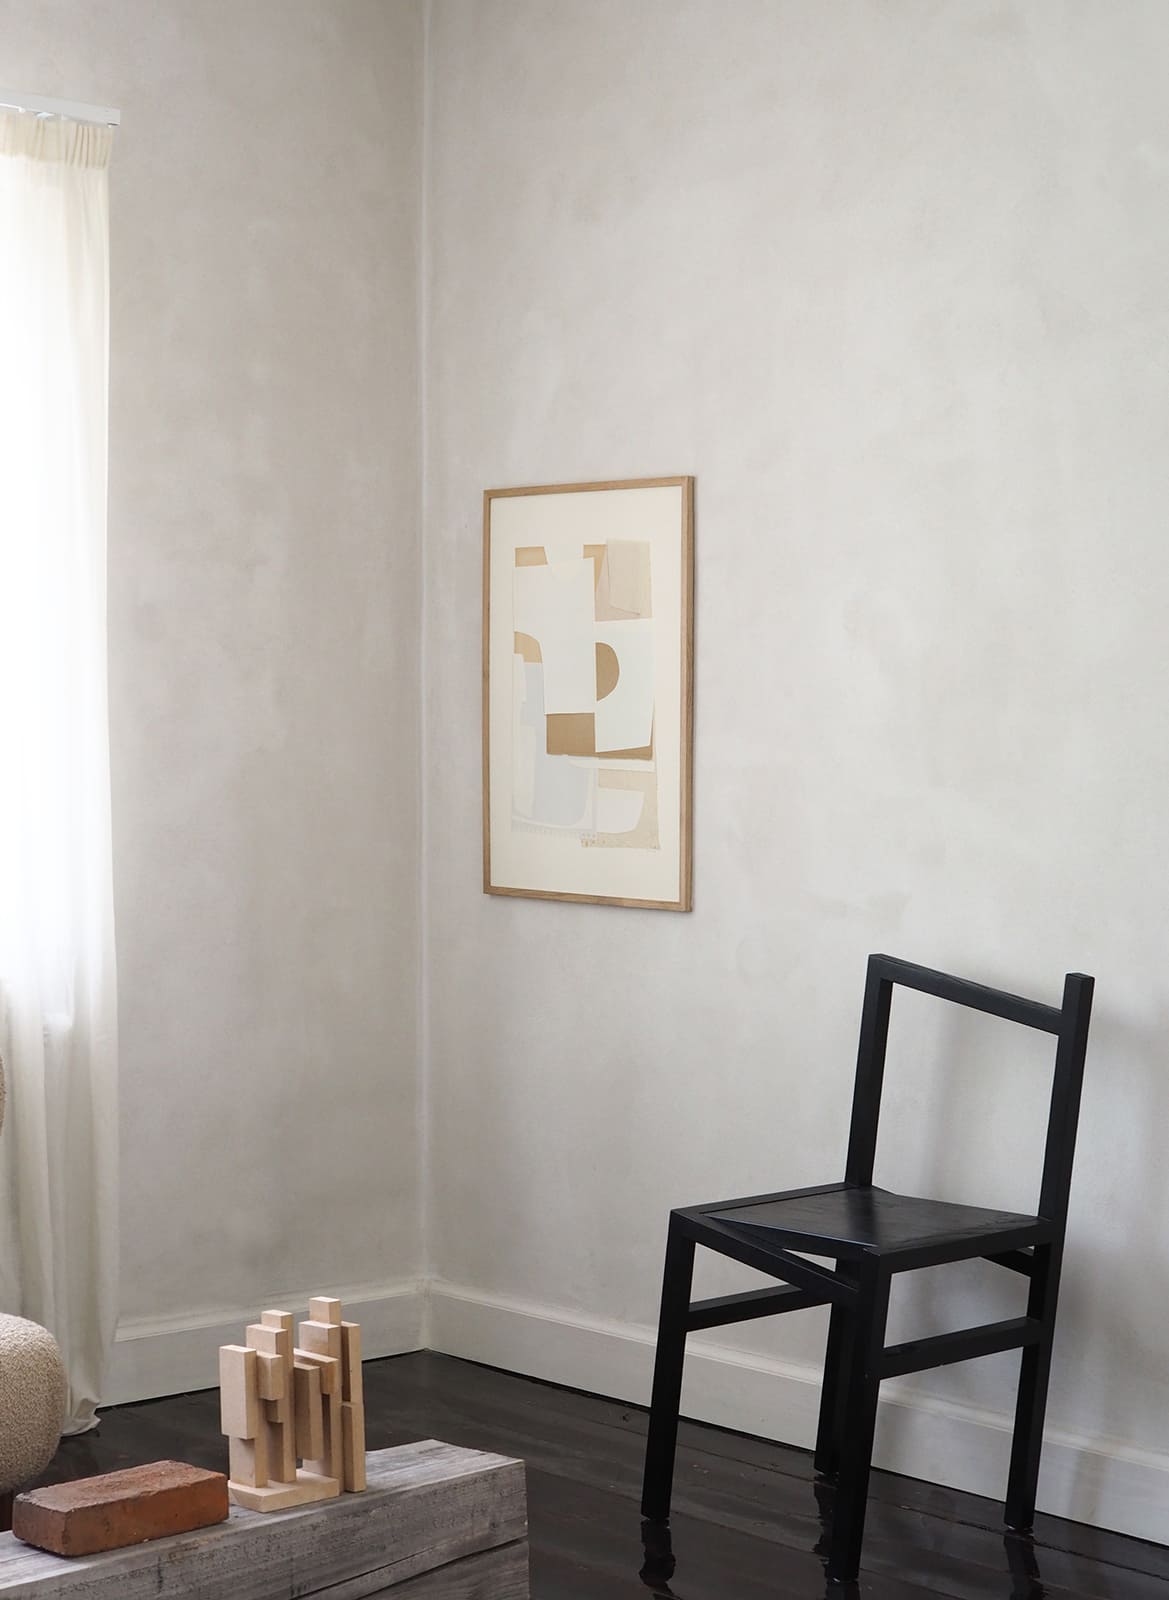  Framed minimalistic poster hanging in a living room by Atelier Cph